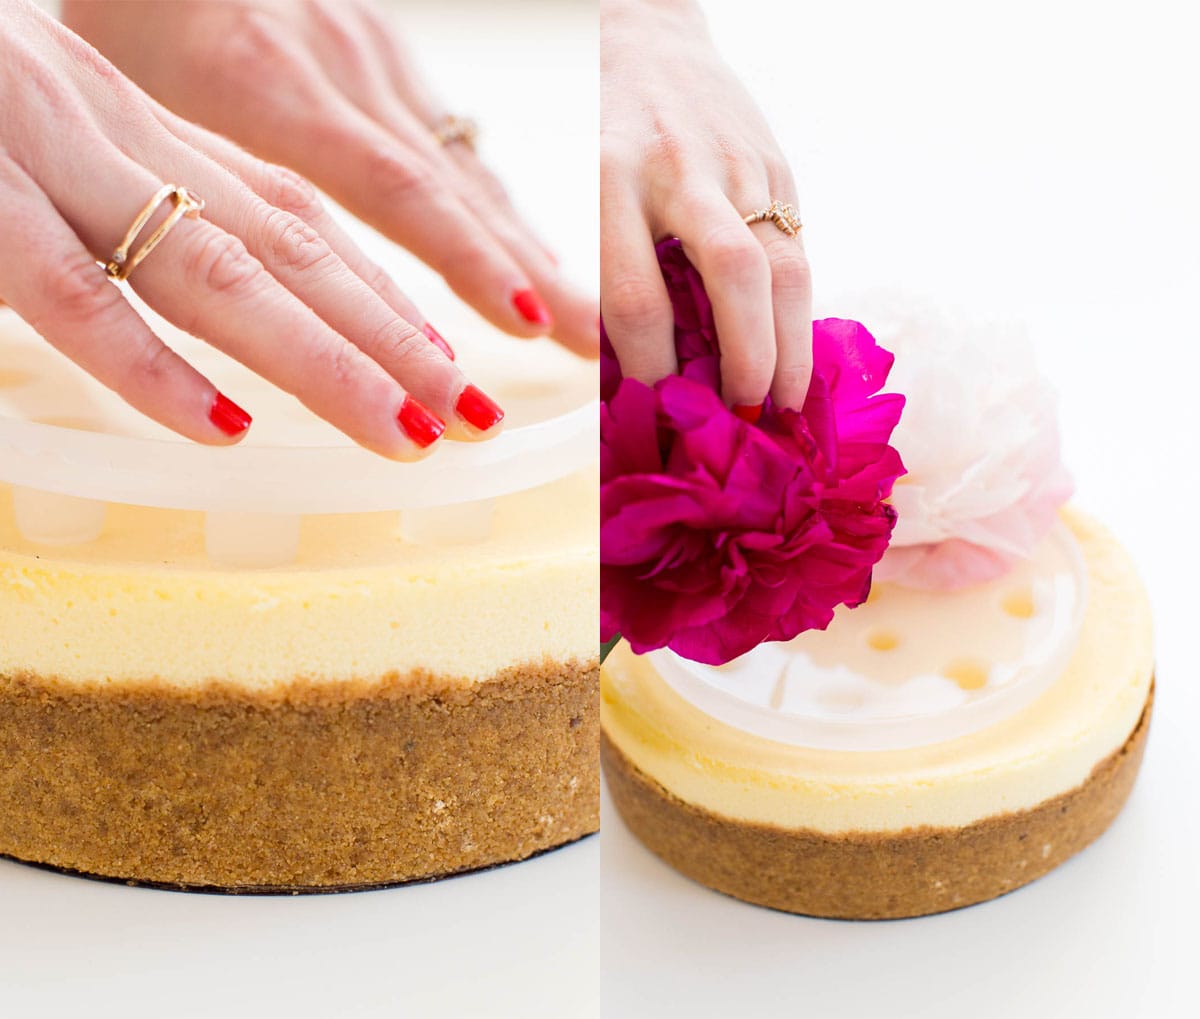 3 DIY Winter Cheesecake Toppers by Lifestyle Blogger Ashley Rose of Sugar & Cloth